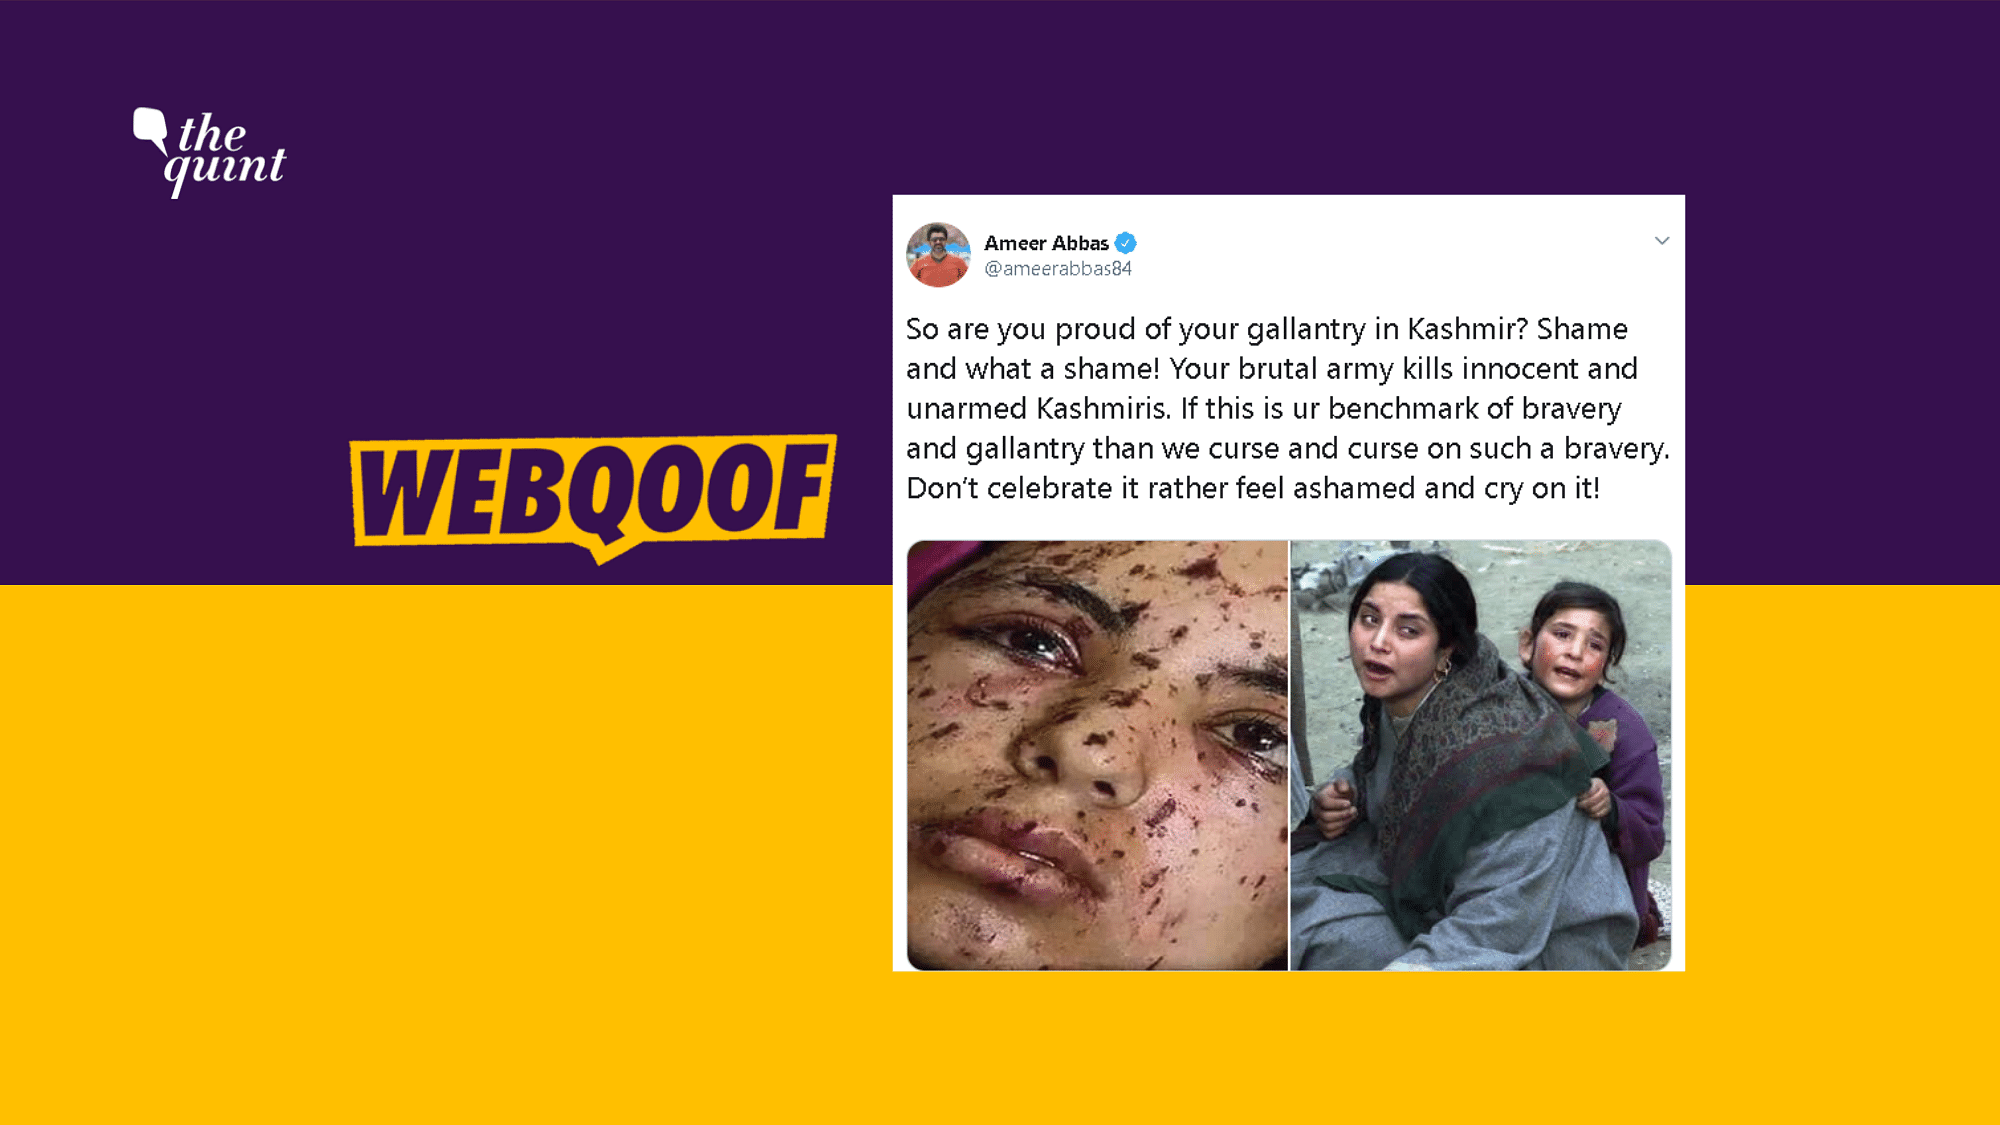 Pakistan-based journalist passed off old images as from the ongoing tension in Jammu and Kashmir.